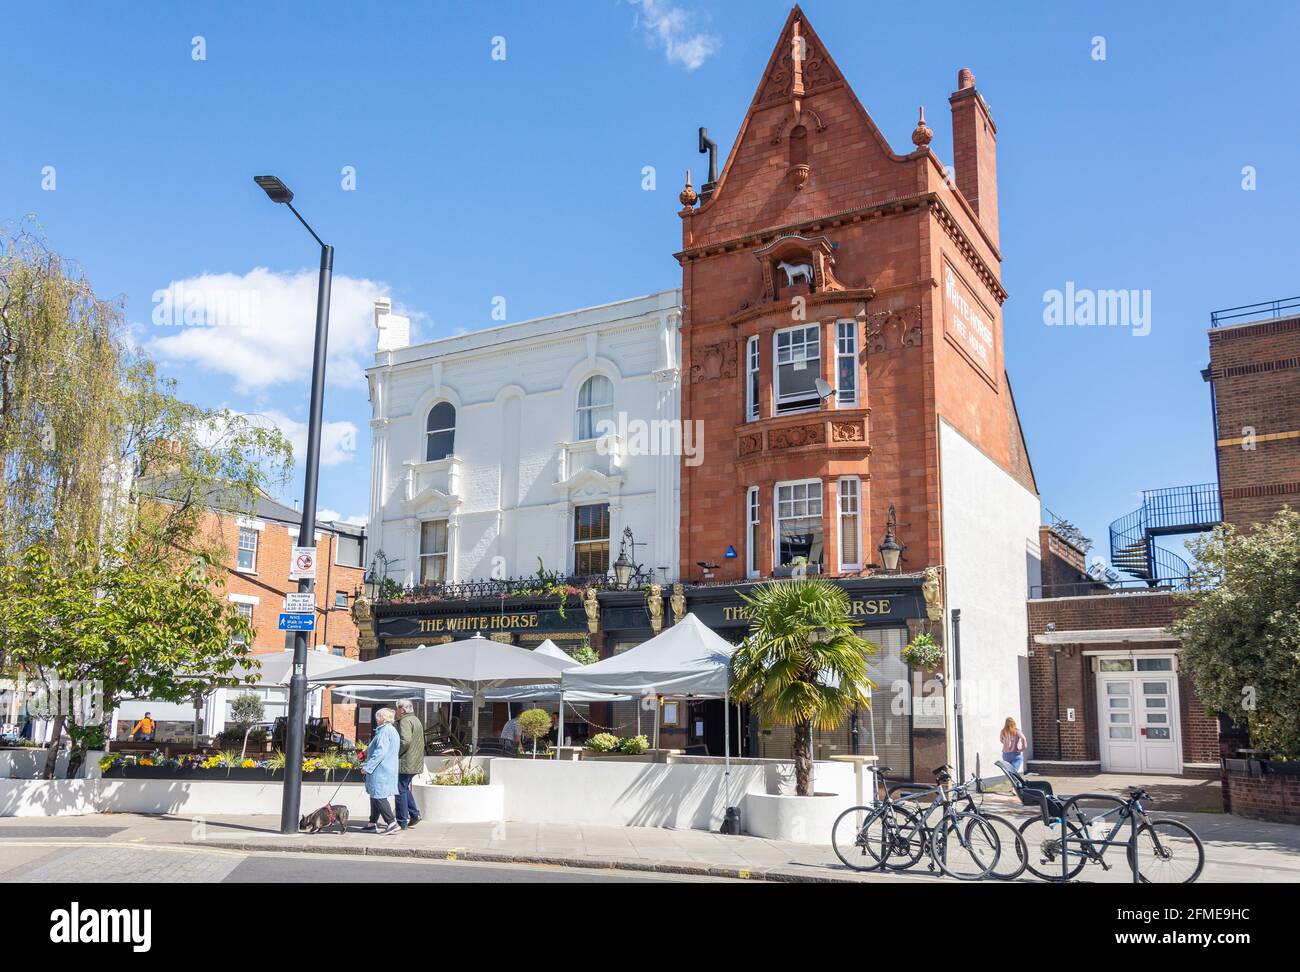 The White Horse Pub, 3 Parsons Green, Parsons Green, London Borough of Hammersmith and Fulham, Greater London, England, United Kingdom Stock Photo